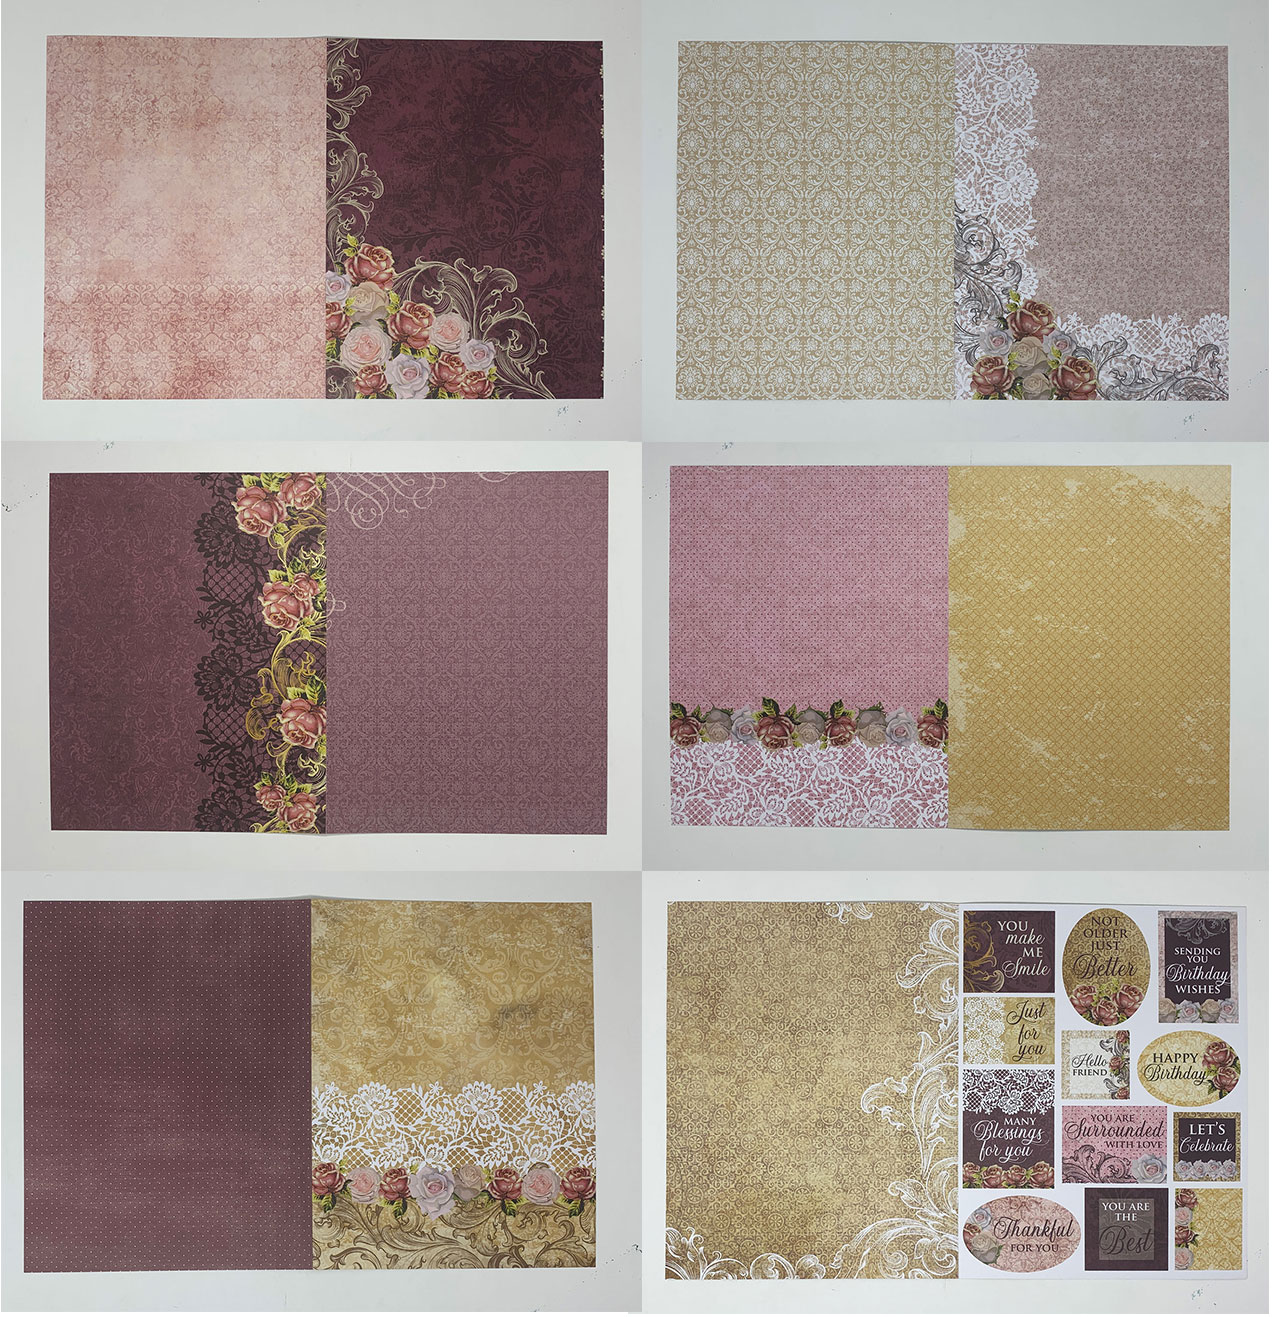 Chantilly Lace 8.5x11 Patterned Pack